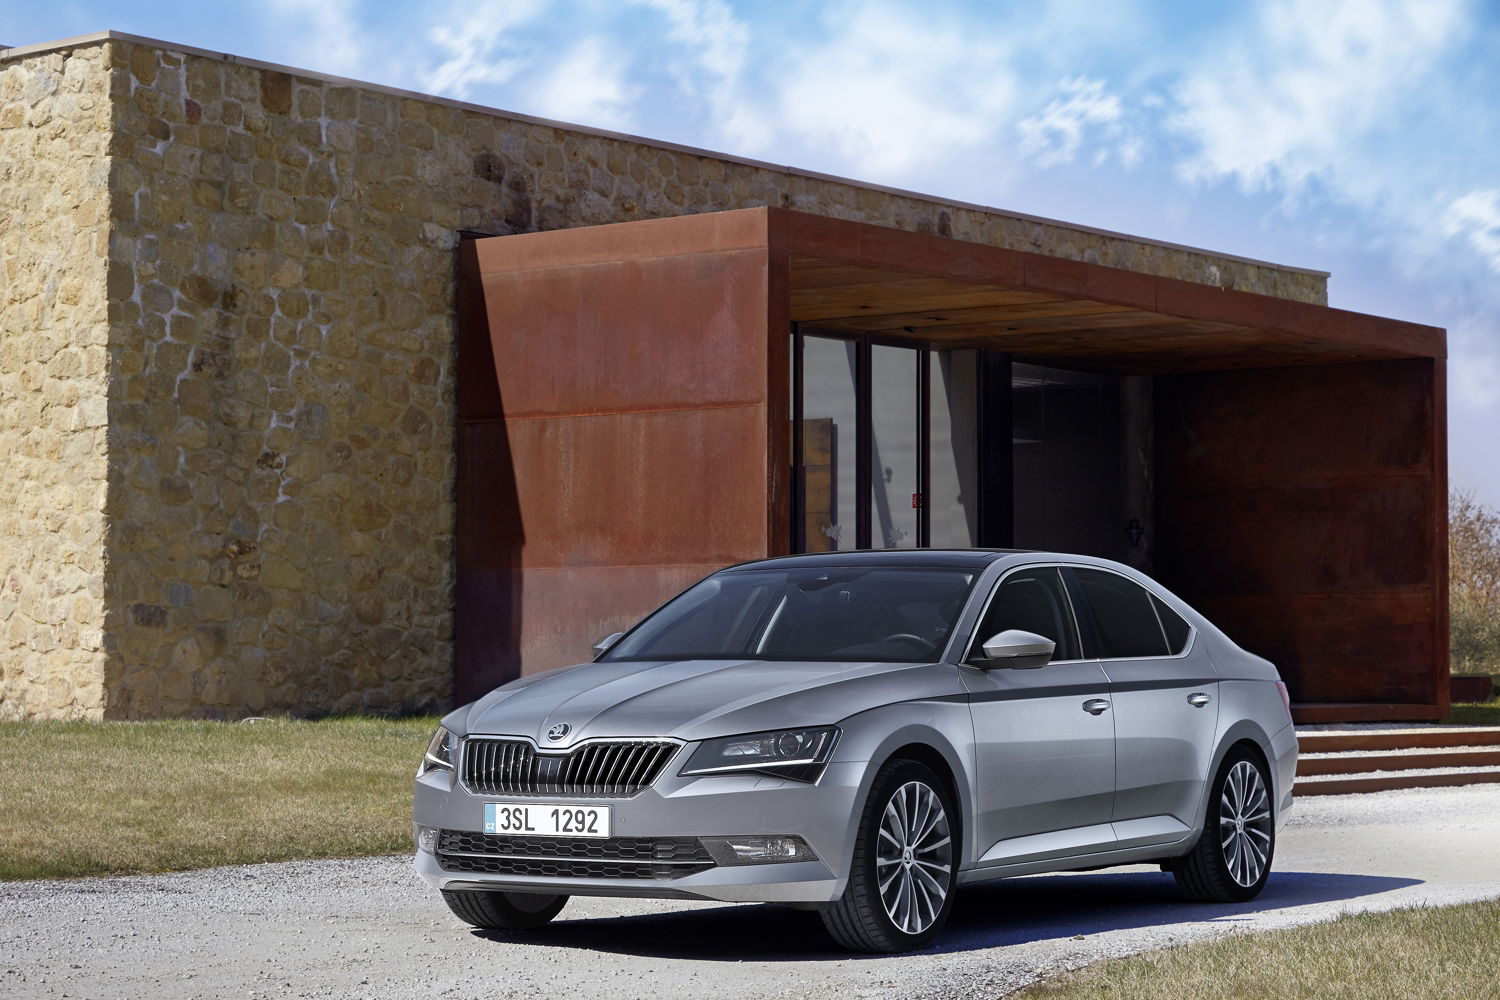 The ŠKODA Superb (photo) was a key factor for growth in the past month with a worldwide increase of approximately 65 per cent compared to the same month last year.